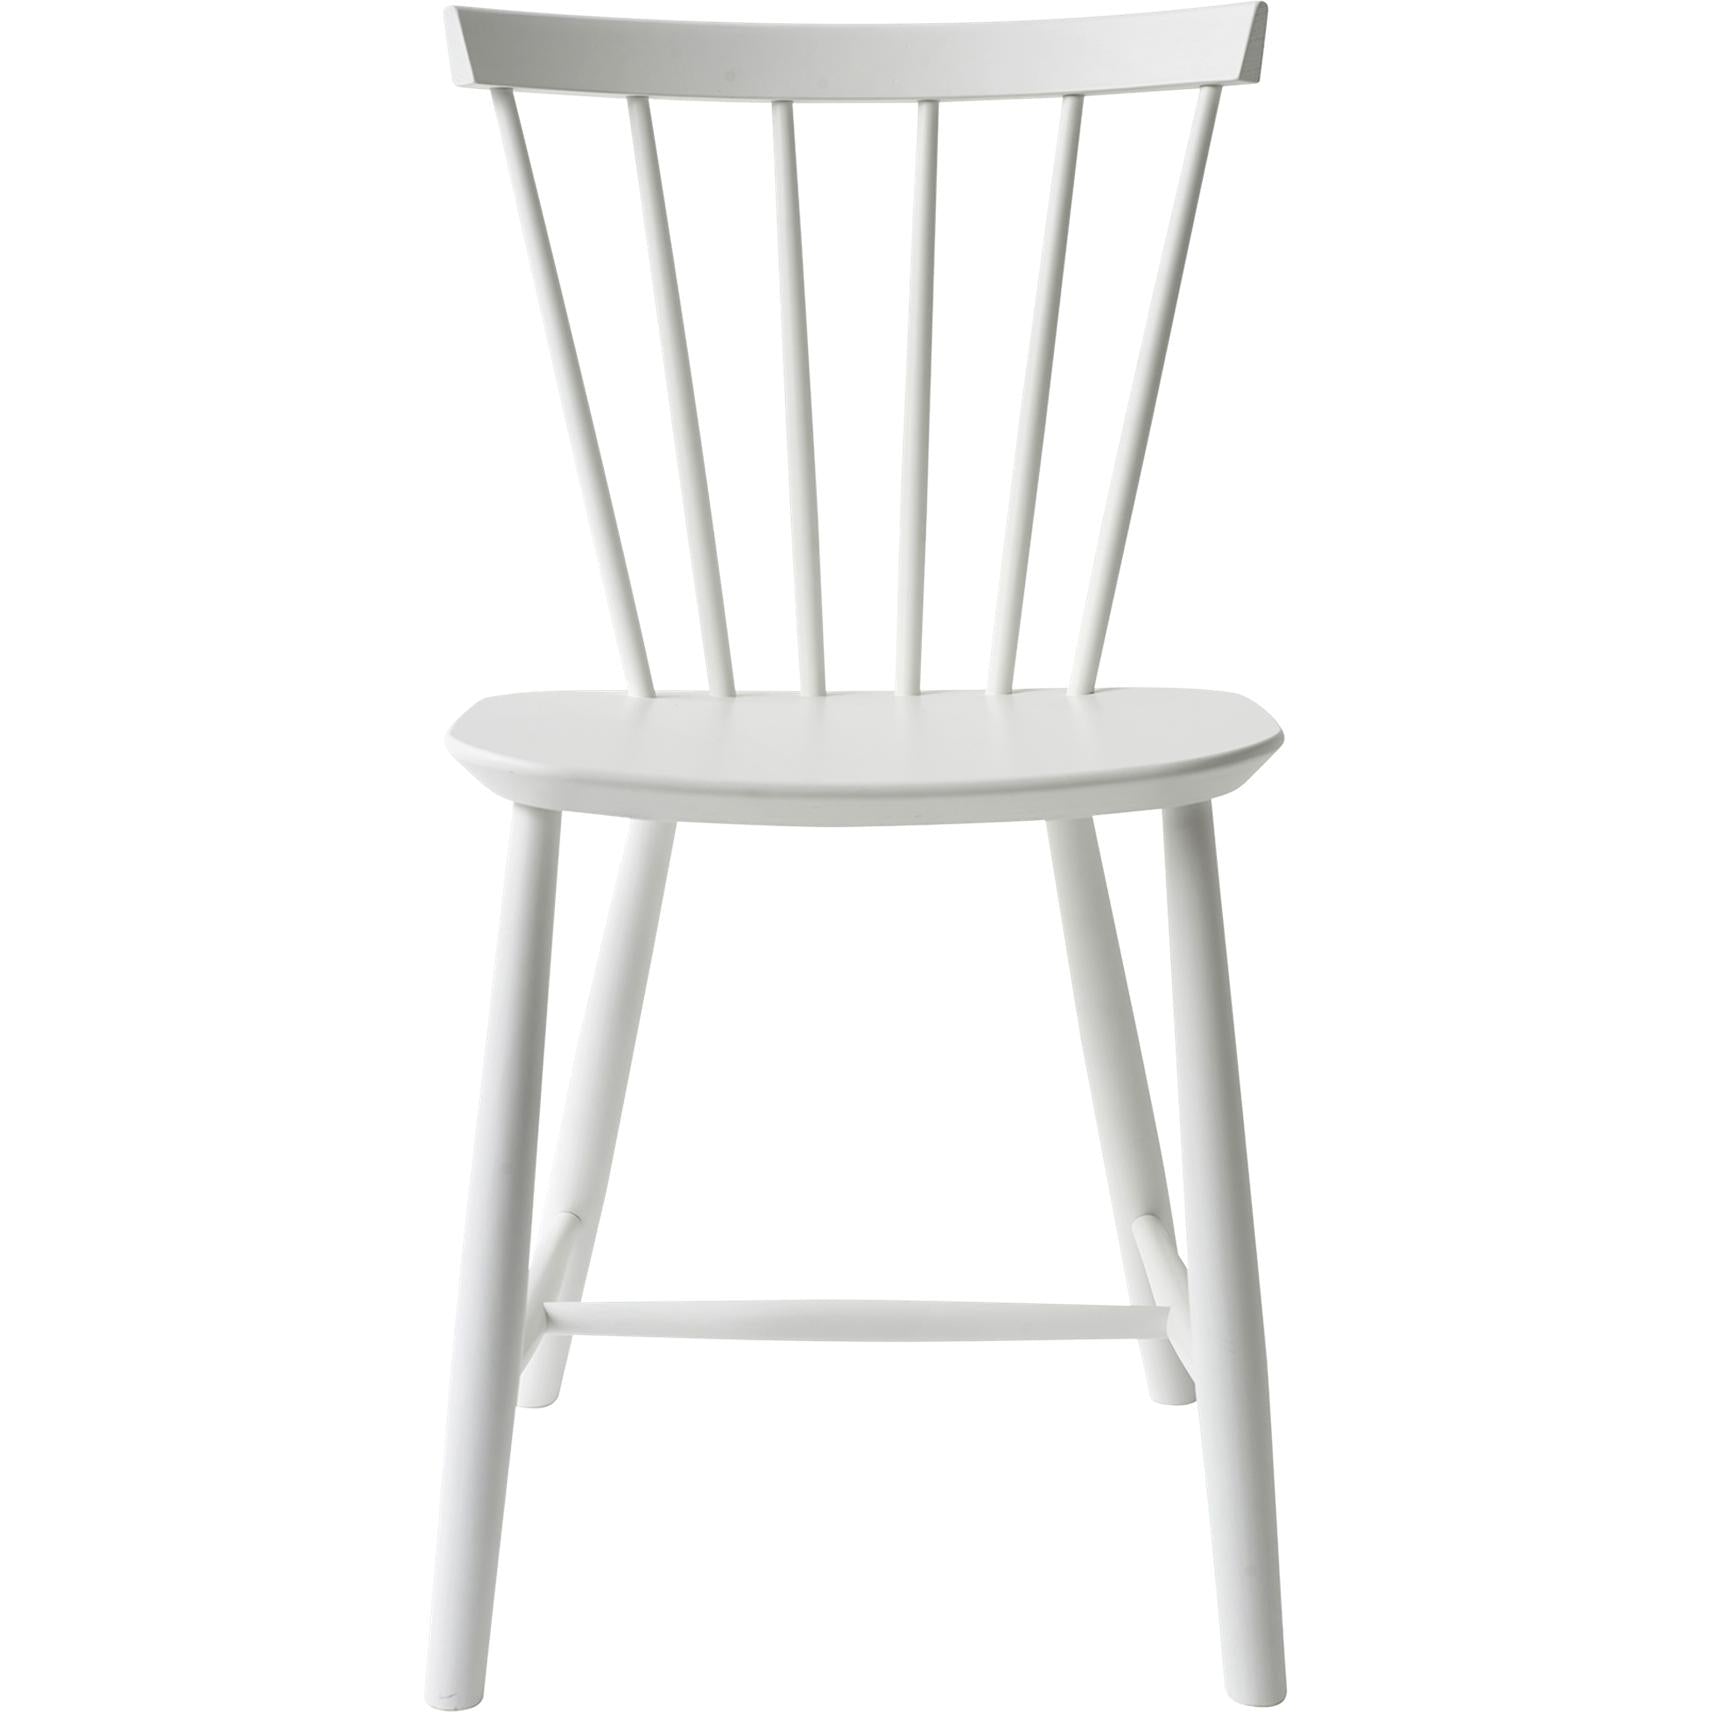 Fdb Møbler Poul Volther J46 Dining Chair Beech, White, H 80cm